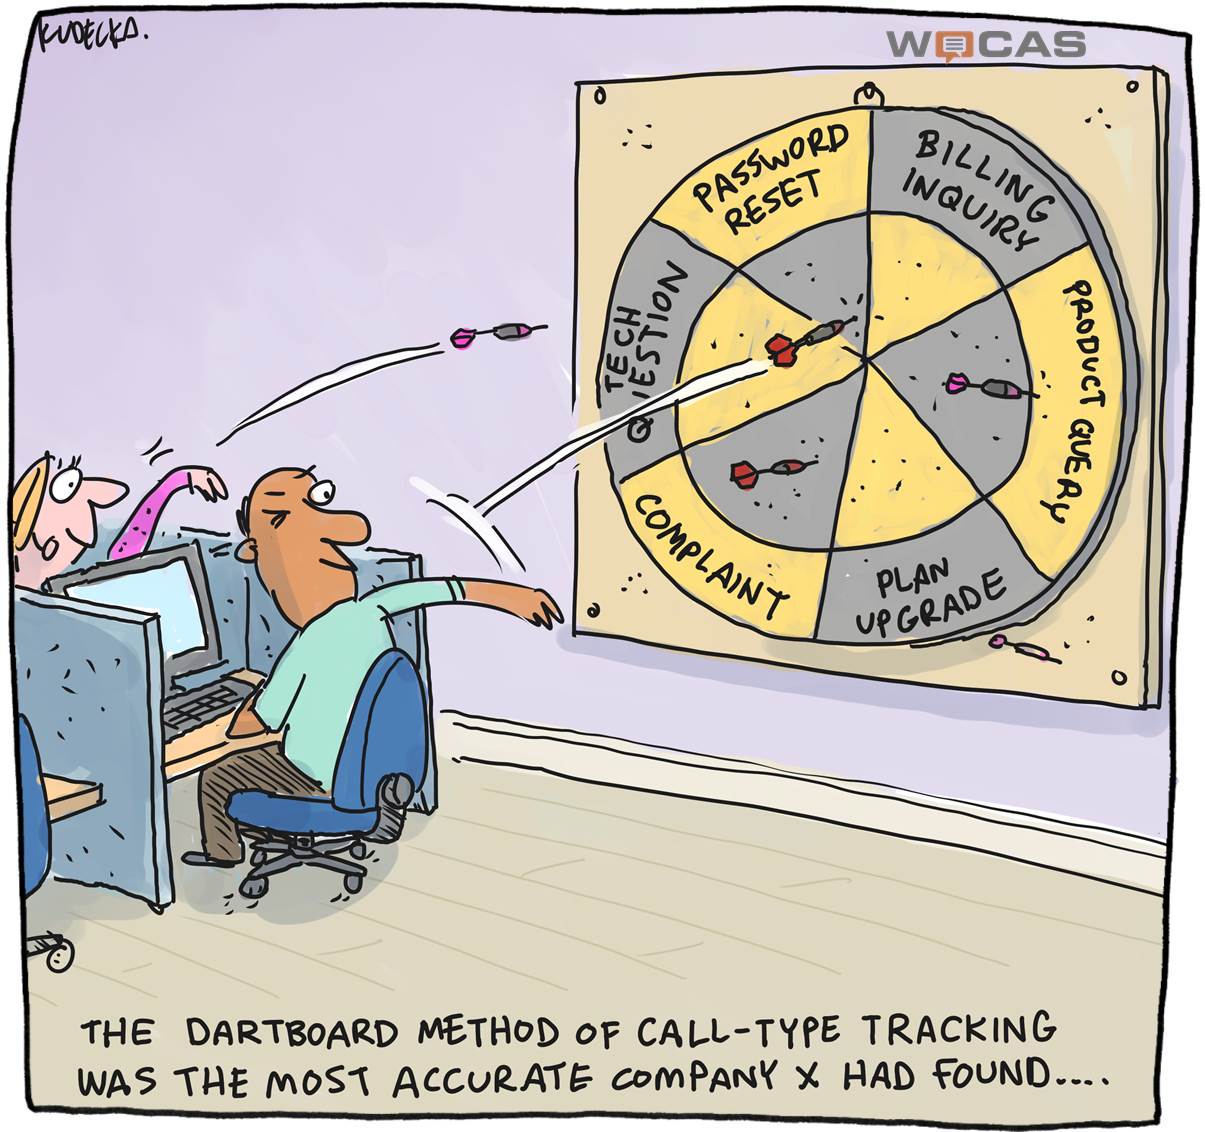 Cartoon: Service staff throw darts at a dartboard, which is divided into different categories by area. Cartoon text: The dartboard method of call-type tracking was the most accurate company X had found...